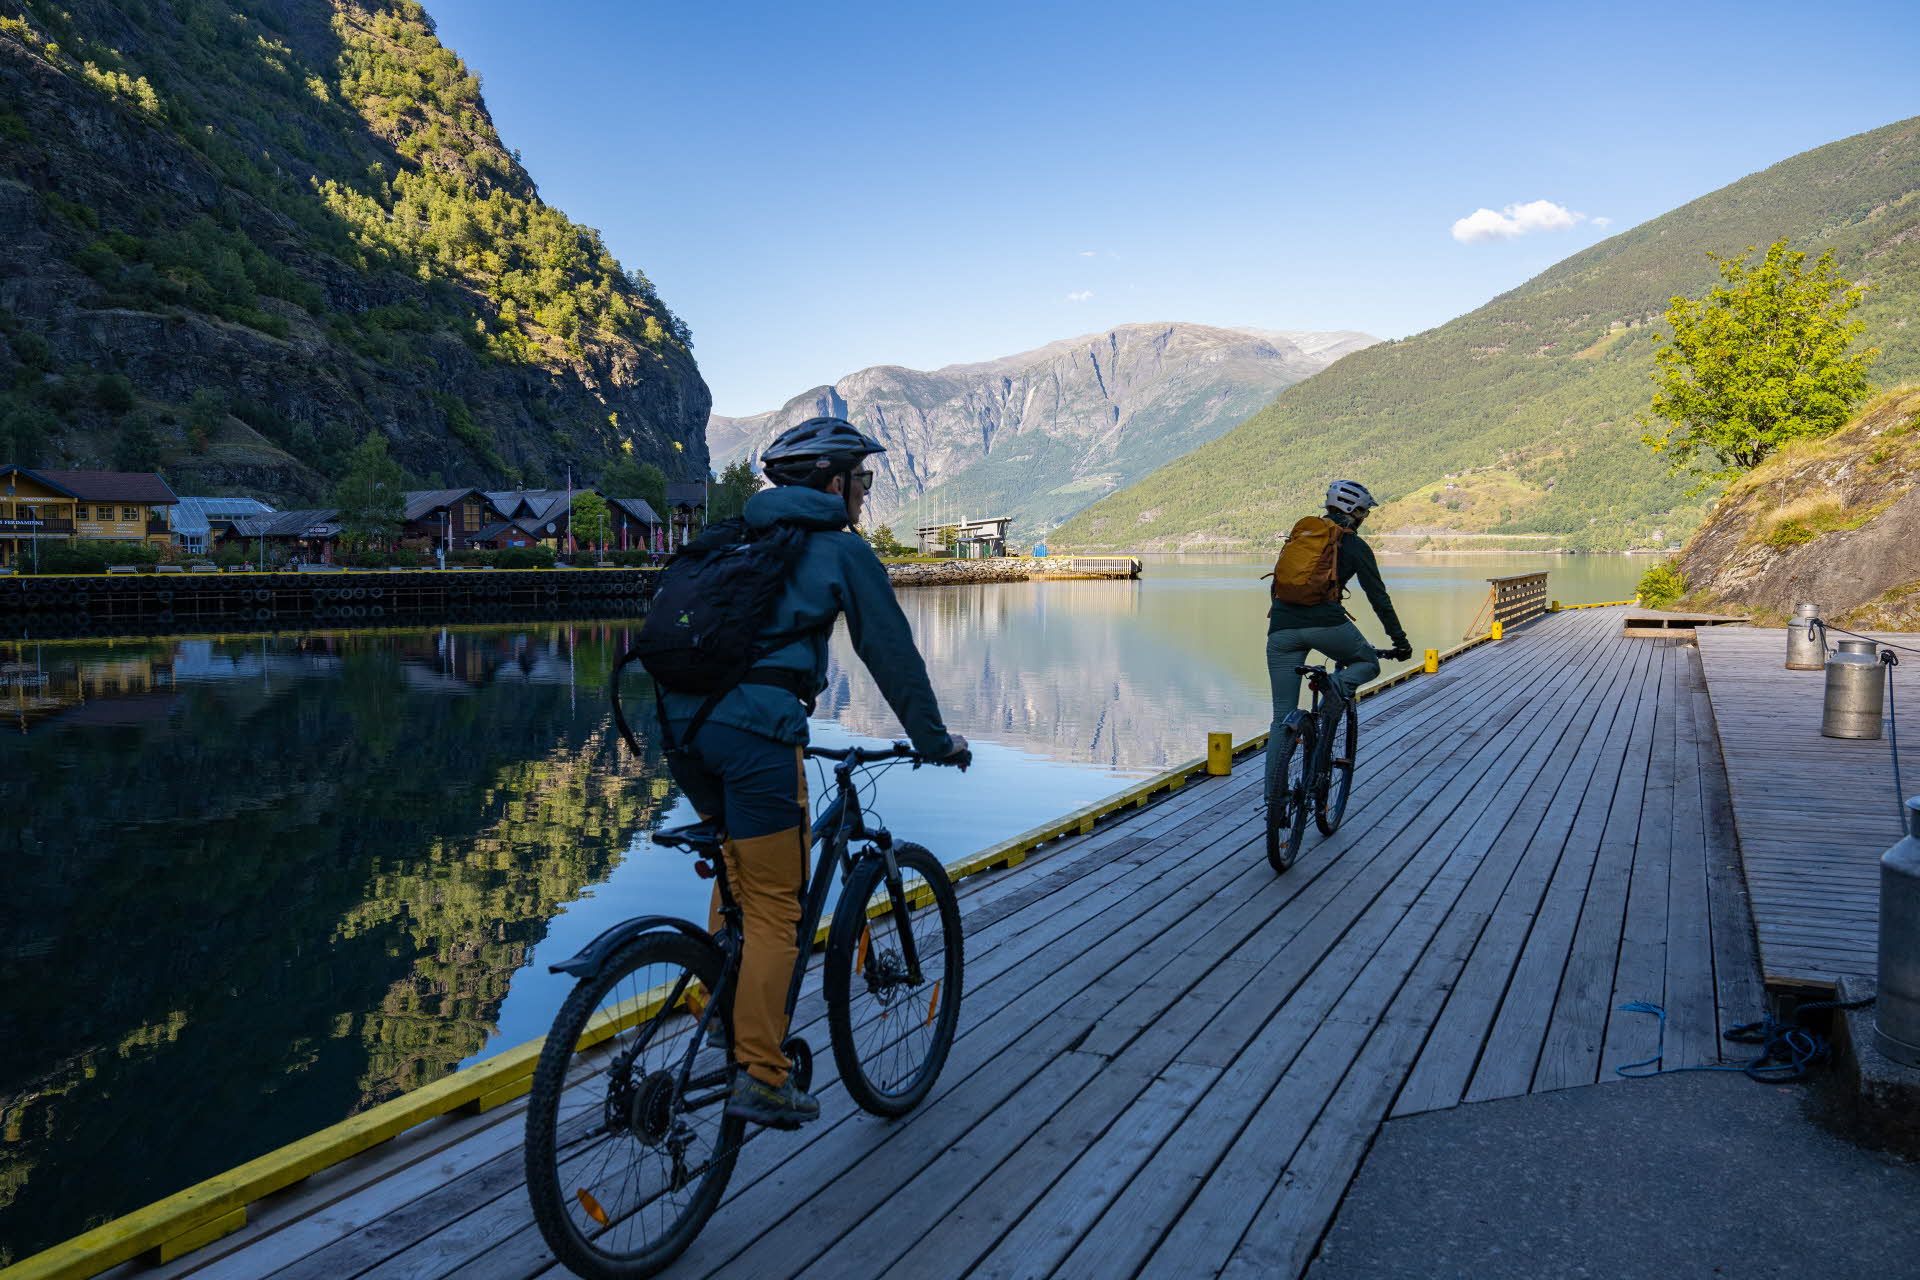 Two cyclists on the quay in Flåm.